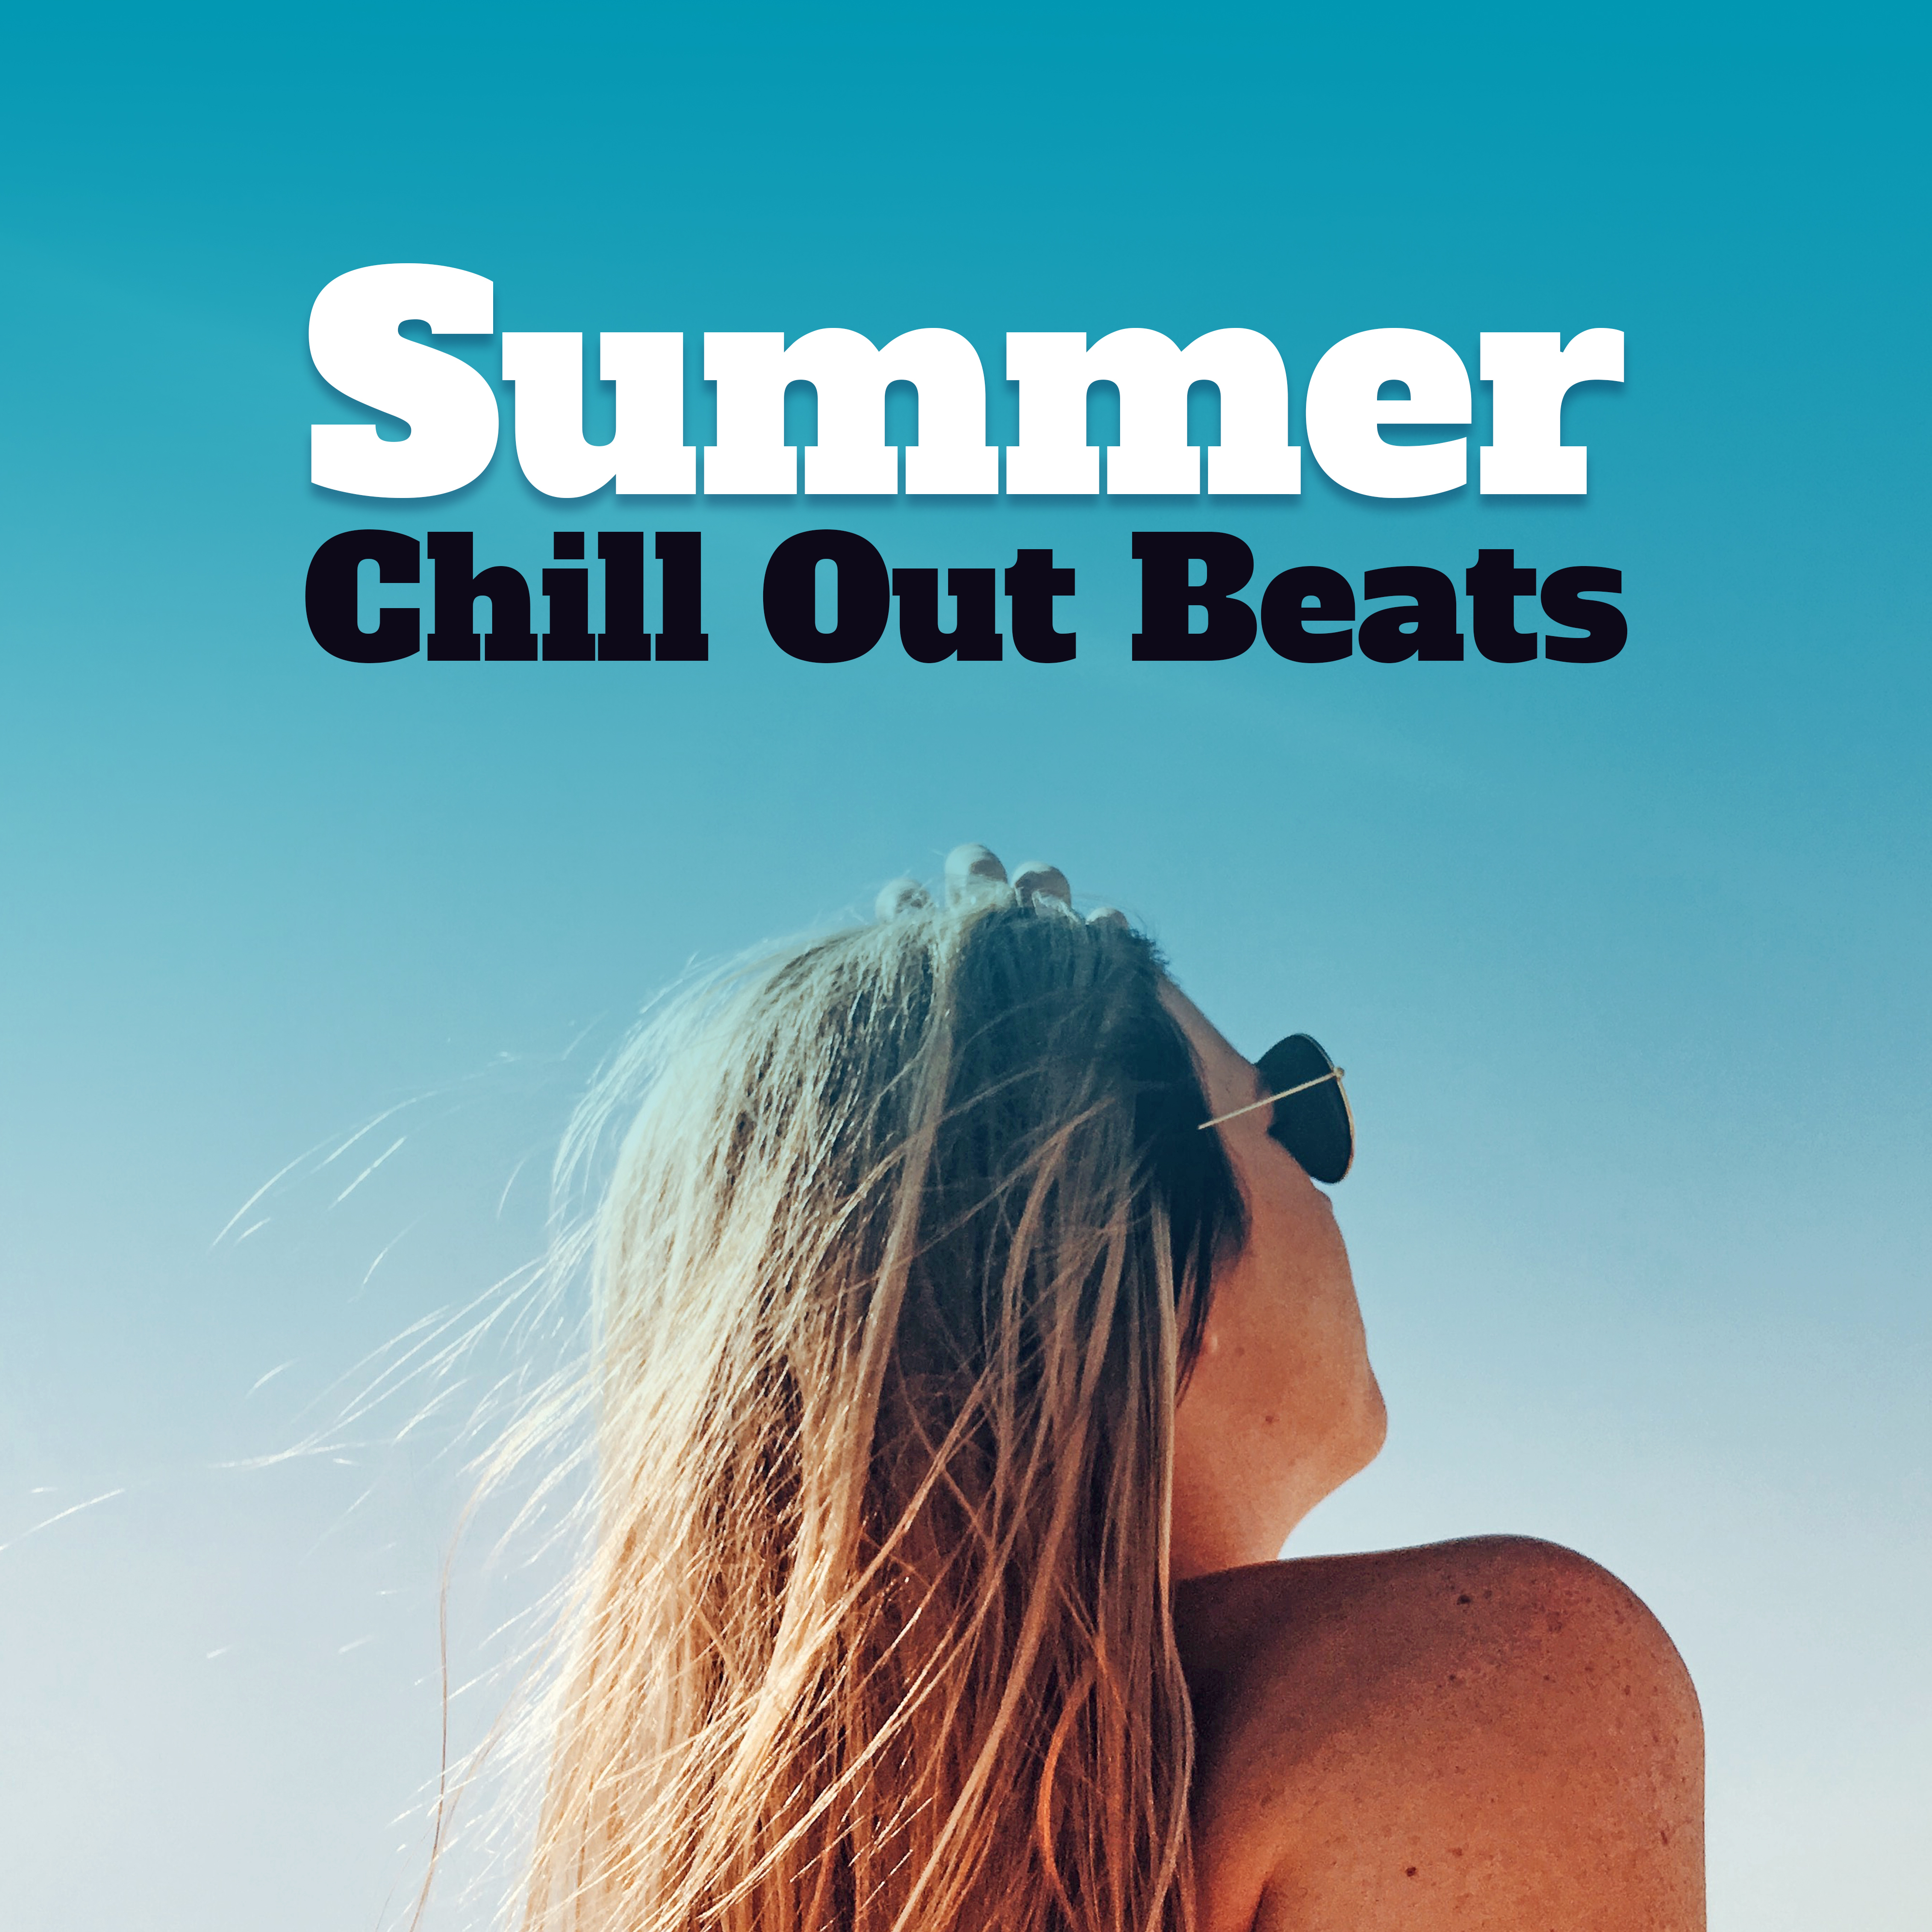 Summer Chill Out Beats – Holiday Relaxation, Beats of Summer, Chill Out Memories, Journey Music